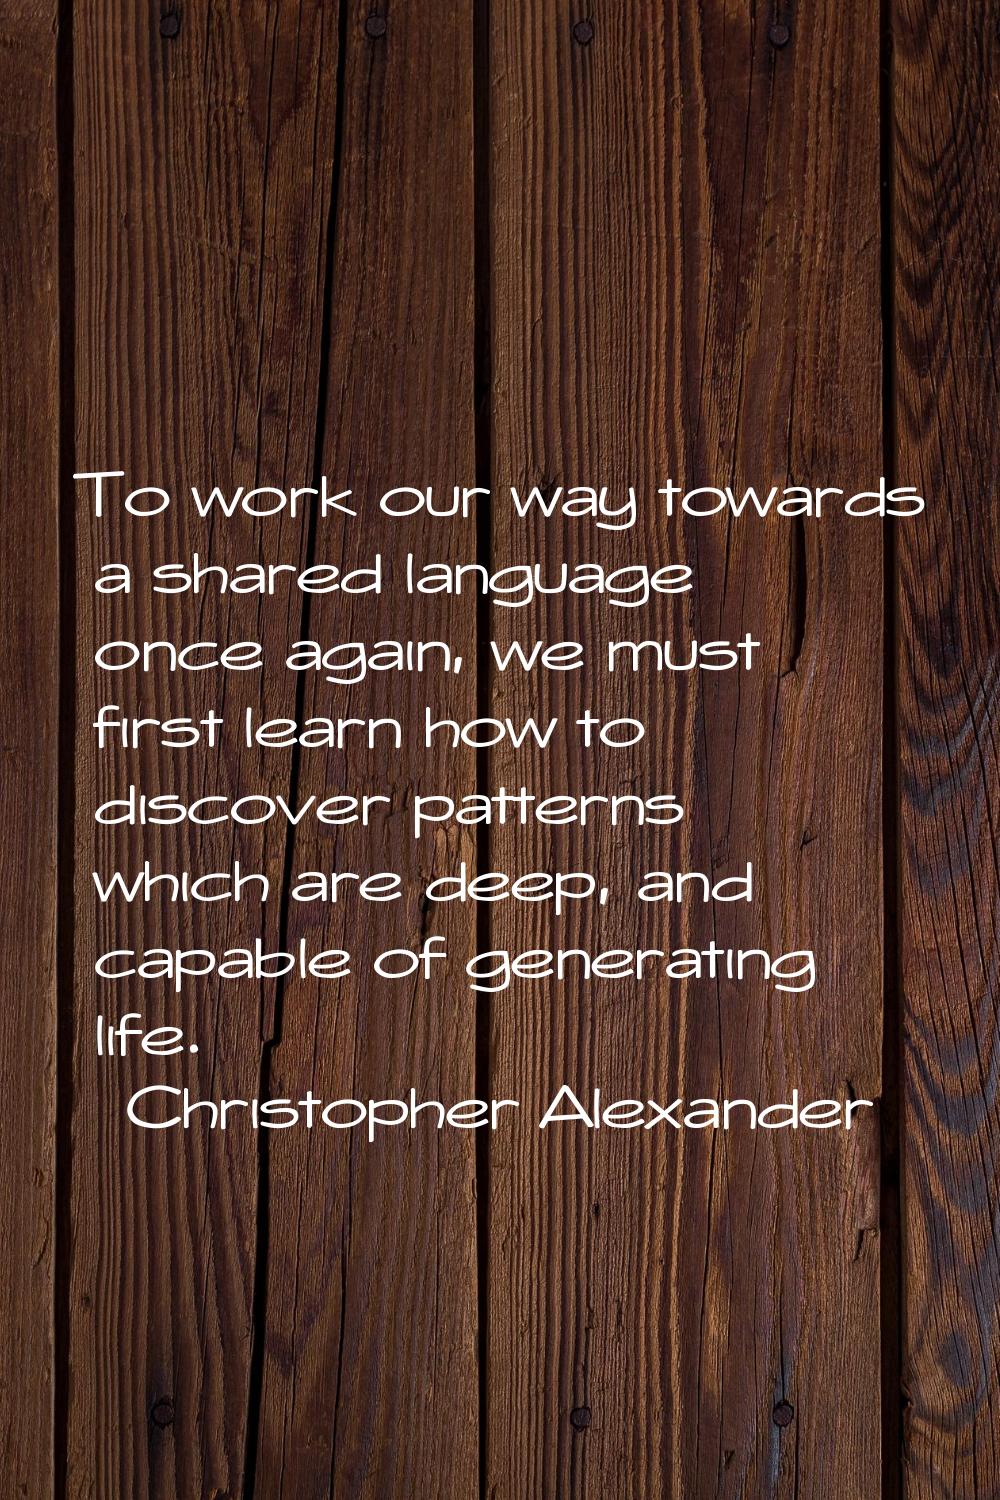 To work our way towards a shared language once again, we must first learn how to discover patterns 